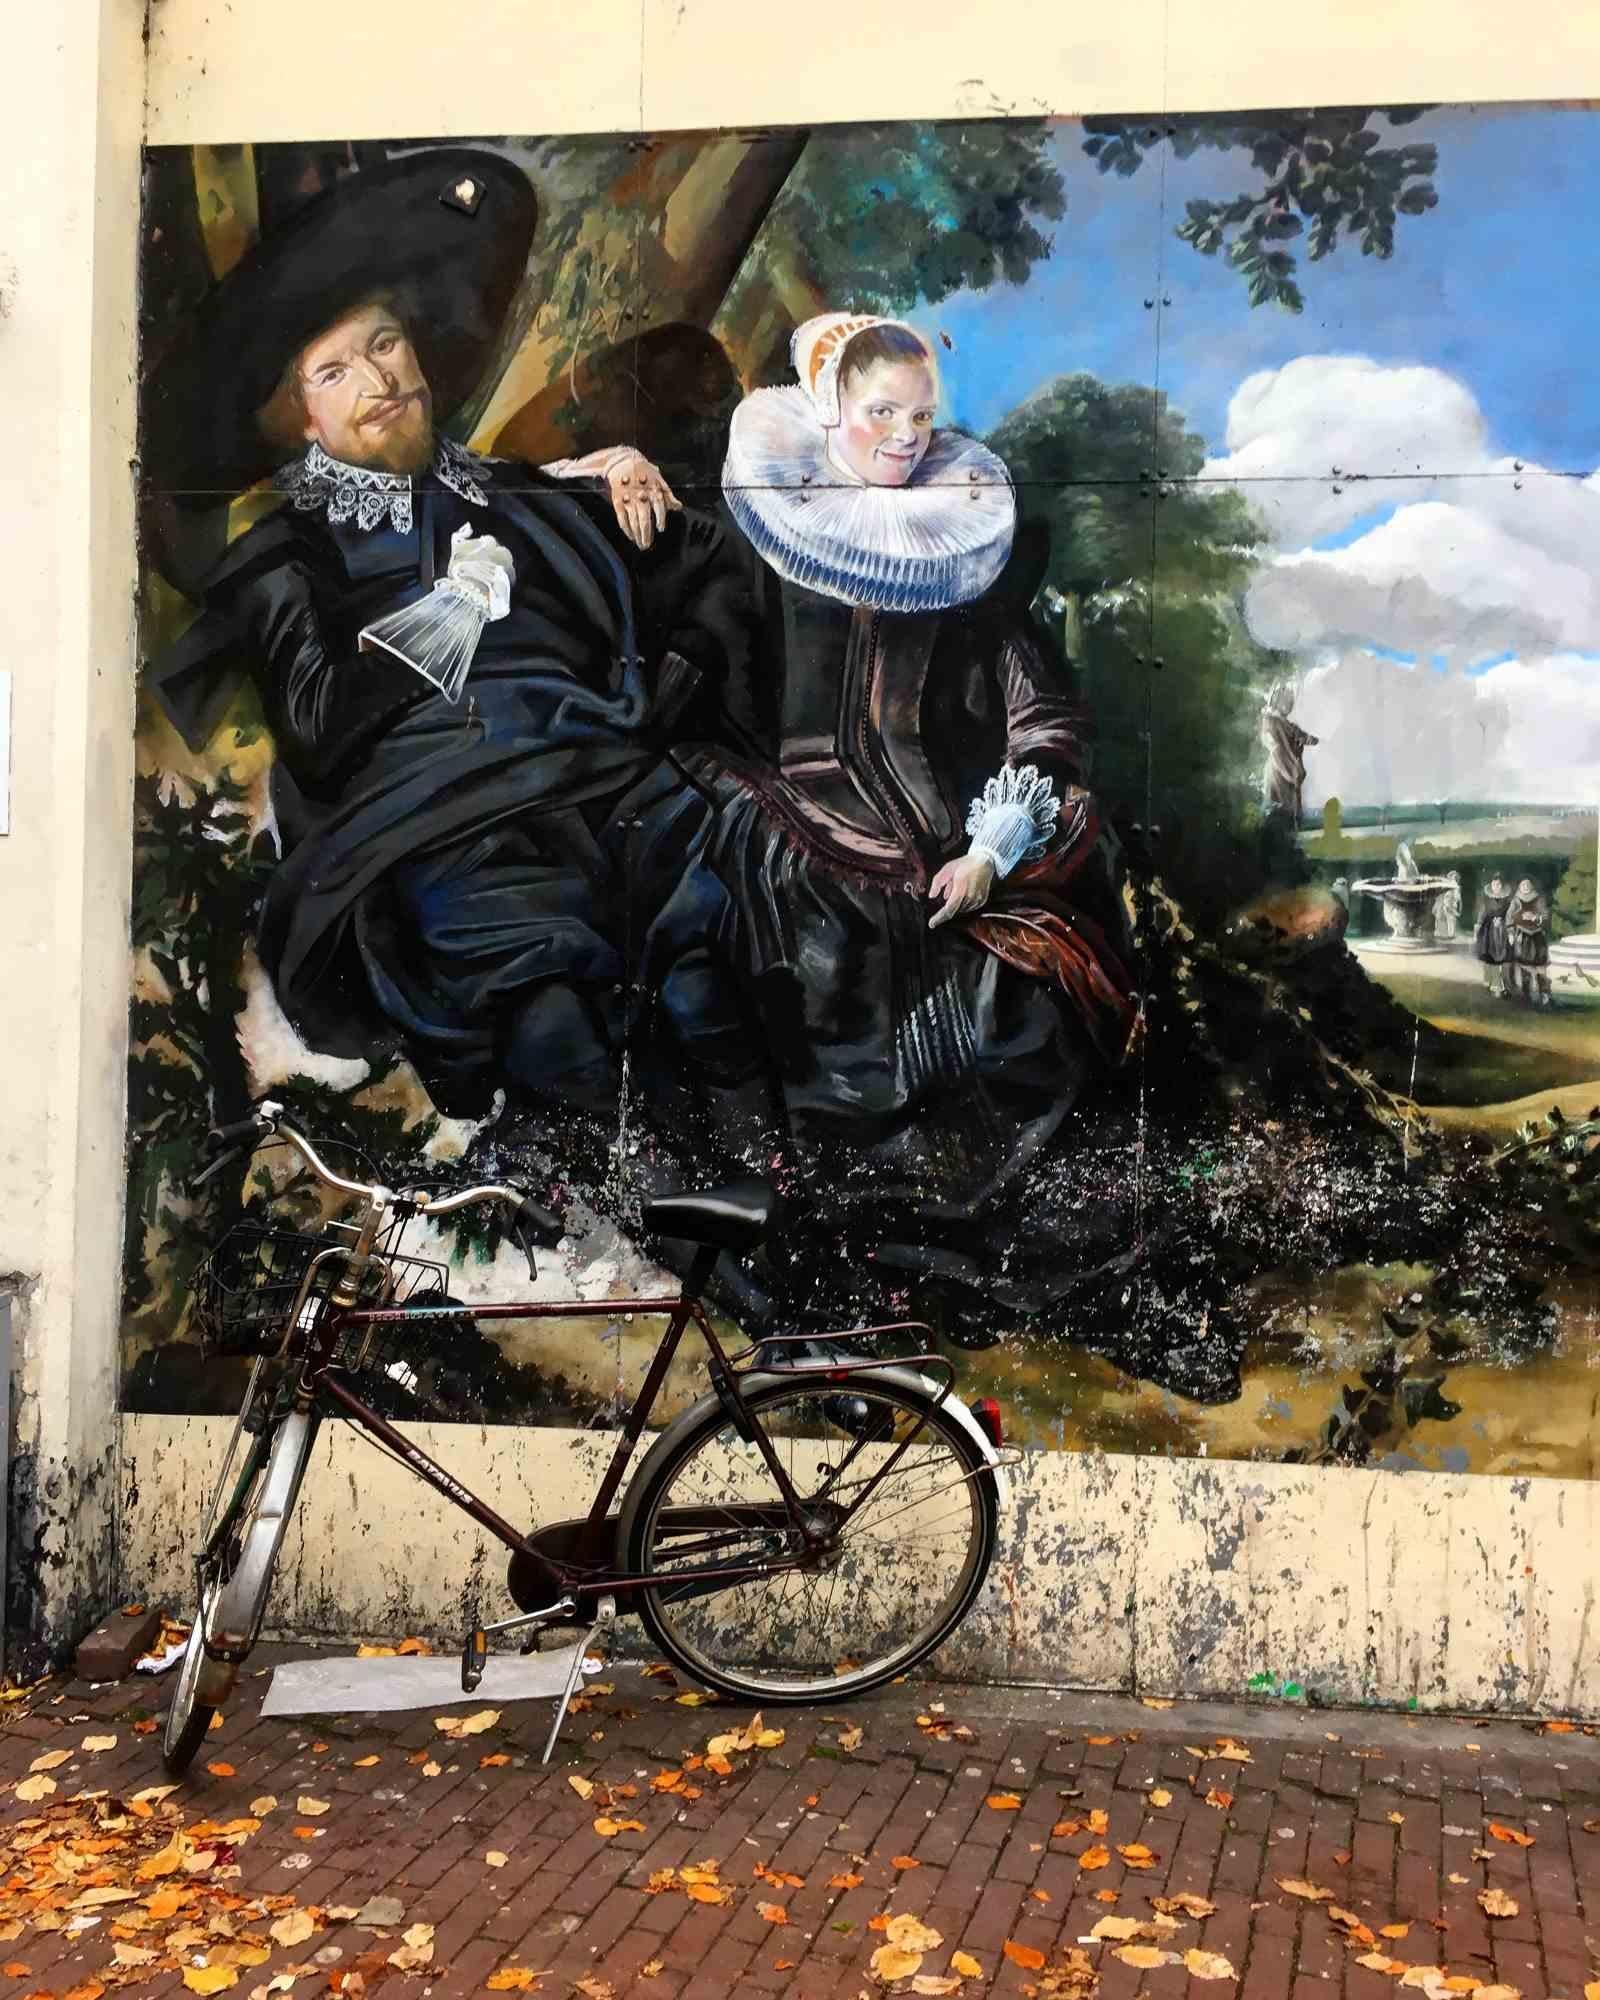 Unknown Figurative Photograph - Dutch Old Master's Mural, Amsterdam  - Photo by Cindi Emond - 2016